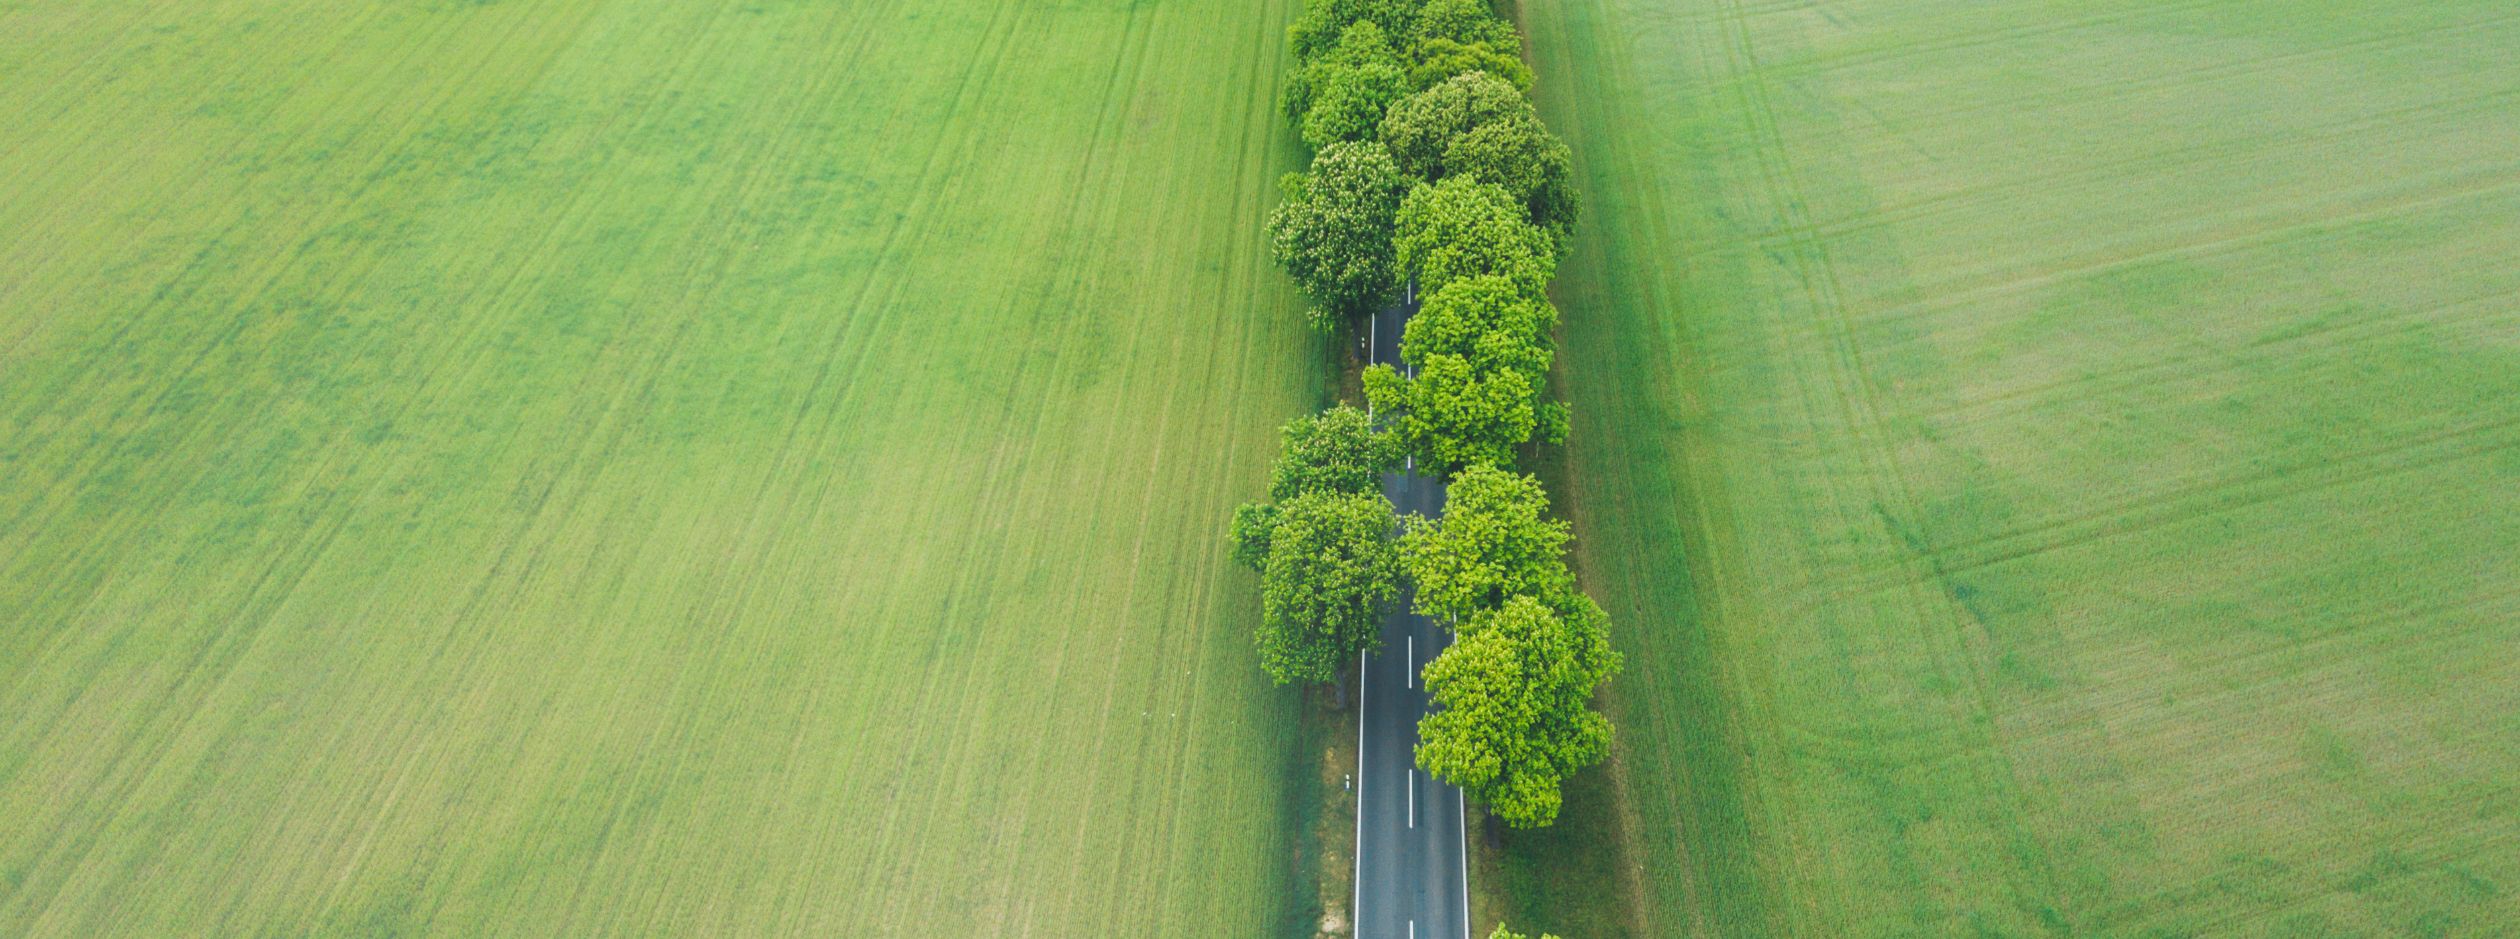 Overhead shot of a 2 lane road canopied by lush trees and flanked by green pastures